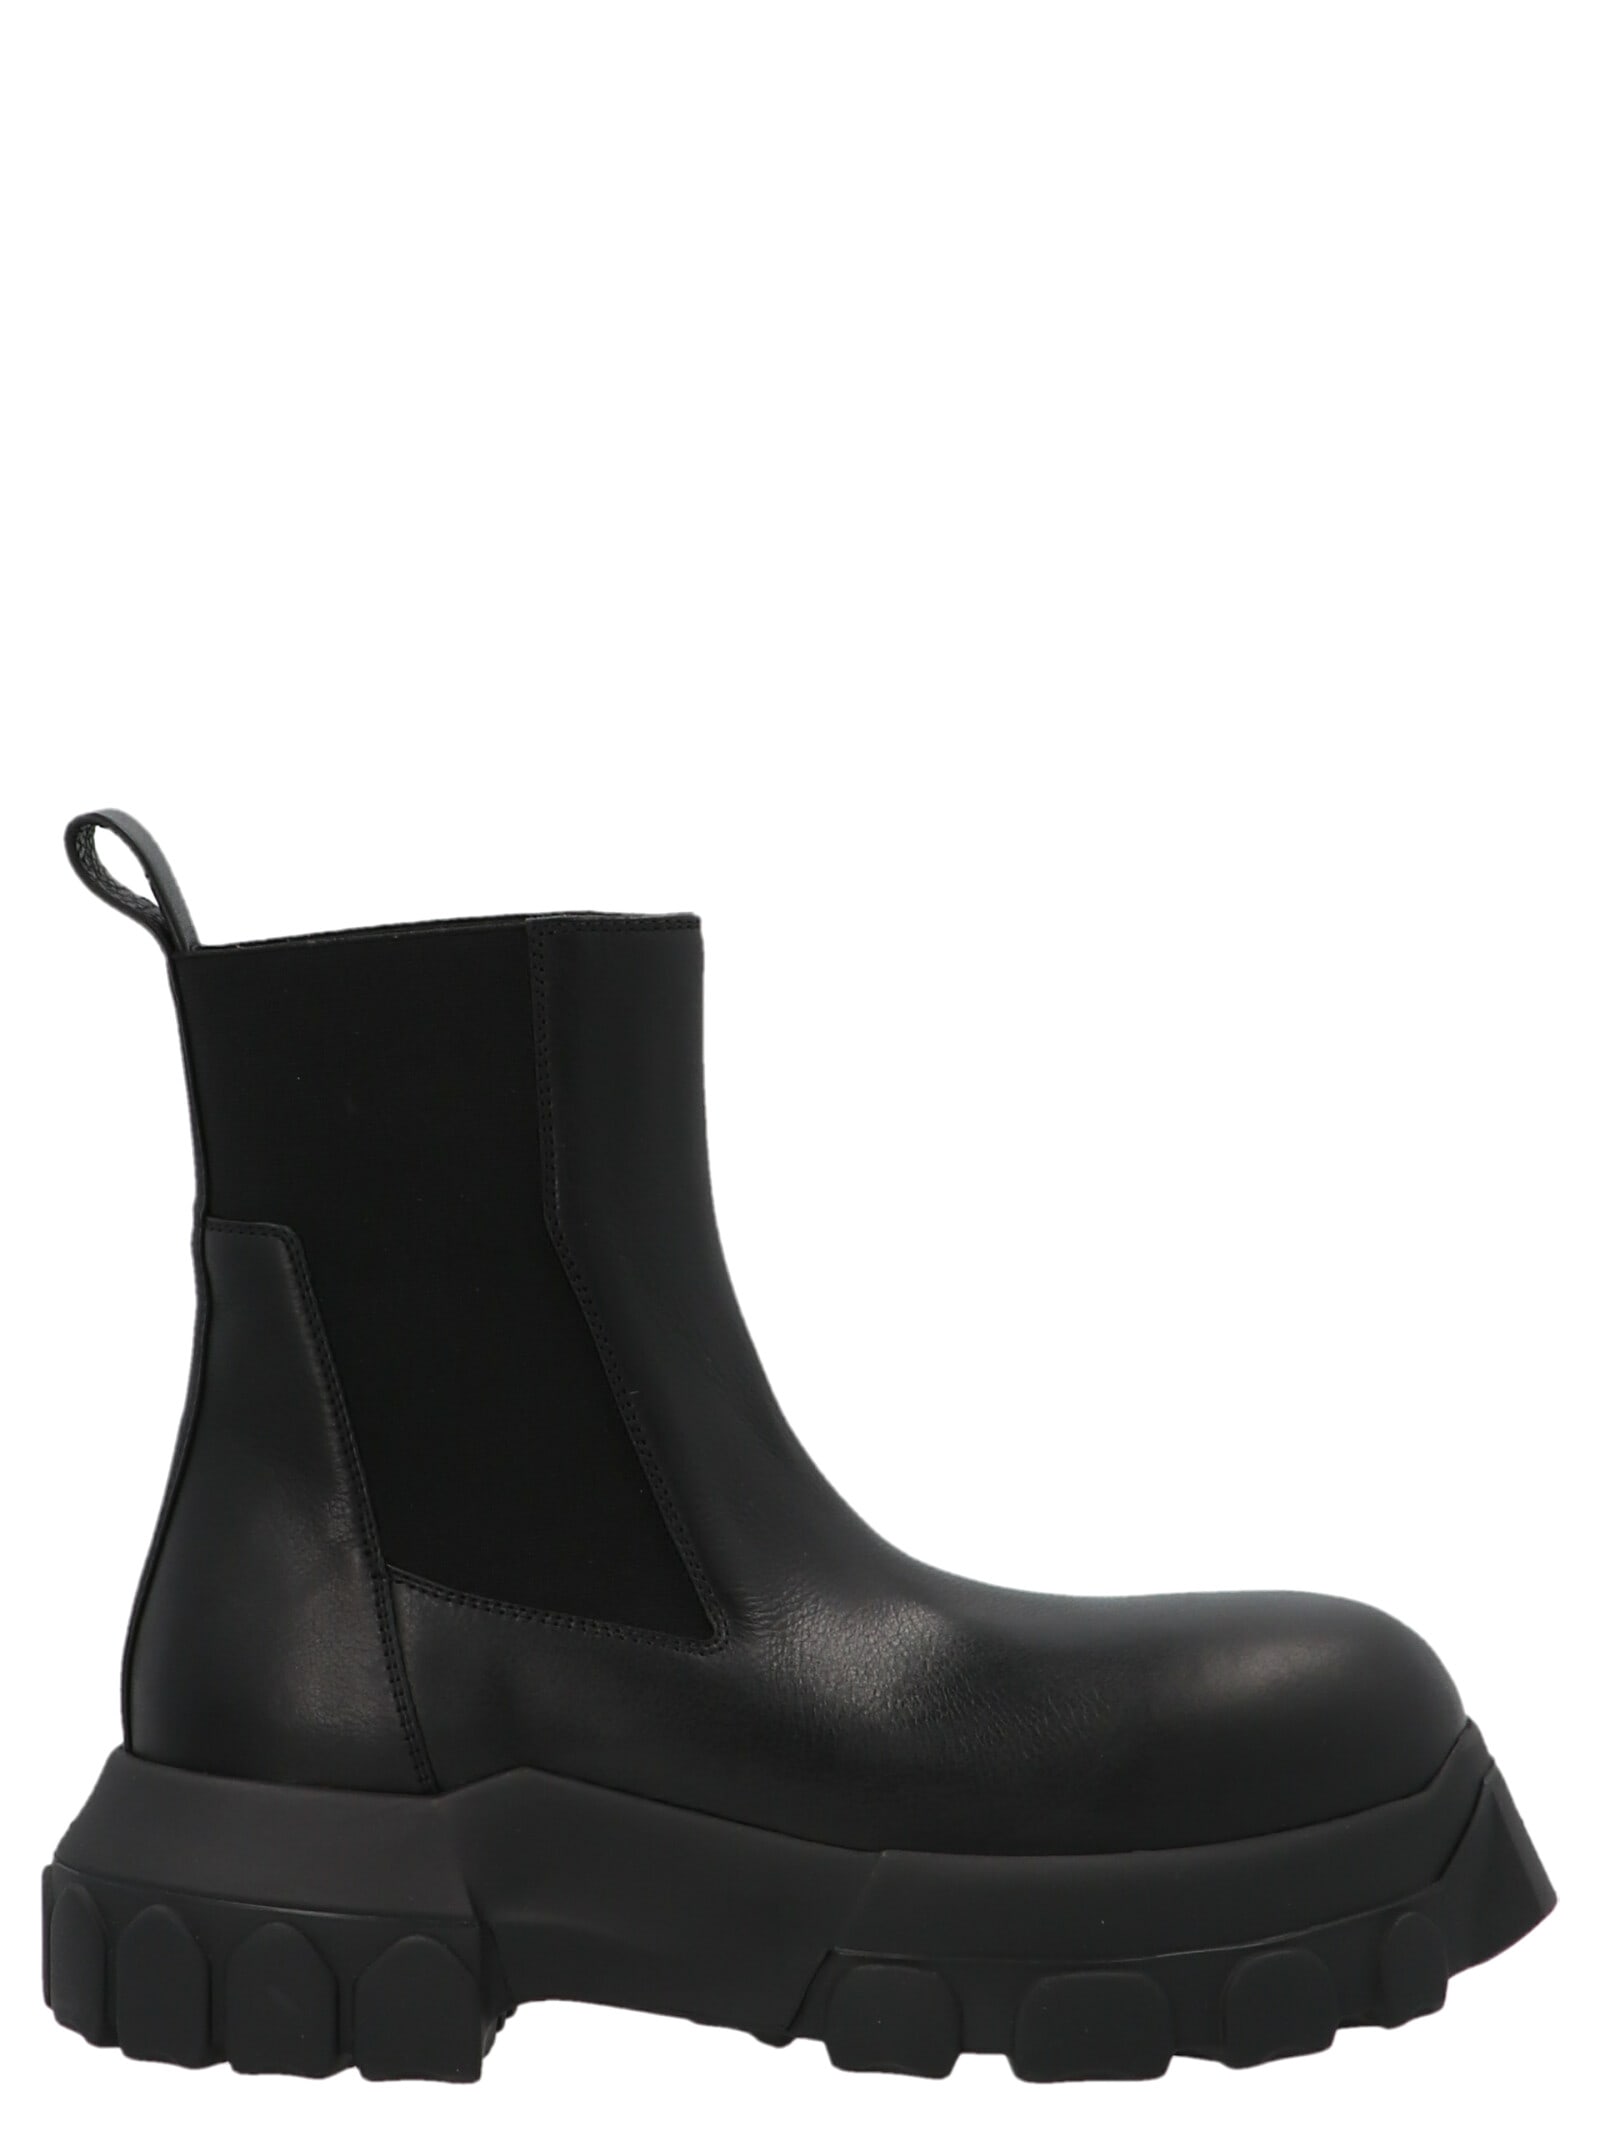 Rick Owens beatle Bozo Tractor Shoes